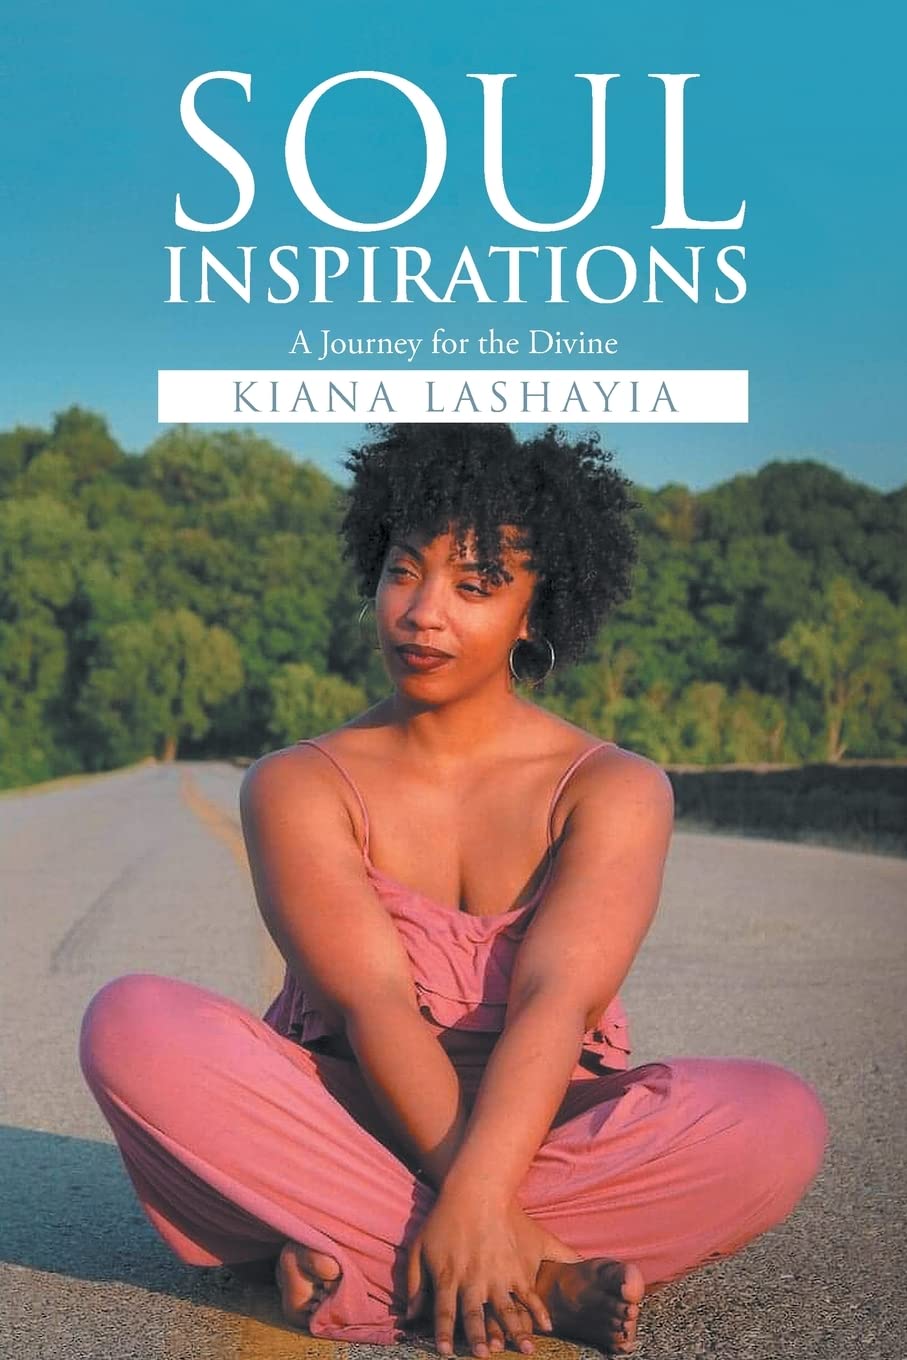 Author’s Tranquility Press, Kiana Lashayia Motivate Readers Through Poetry in Soul Inspirations